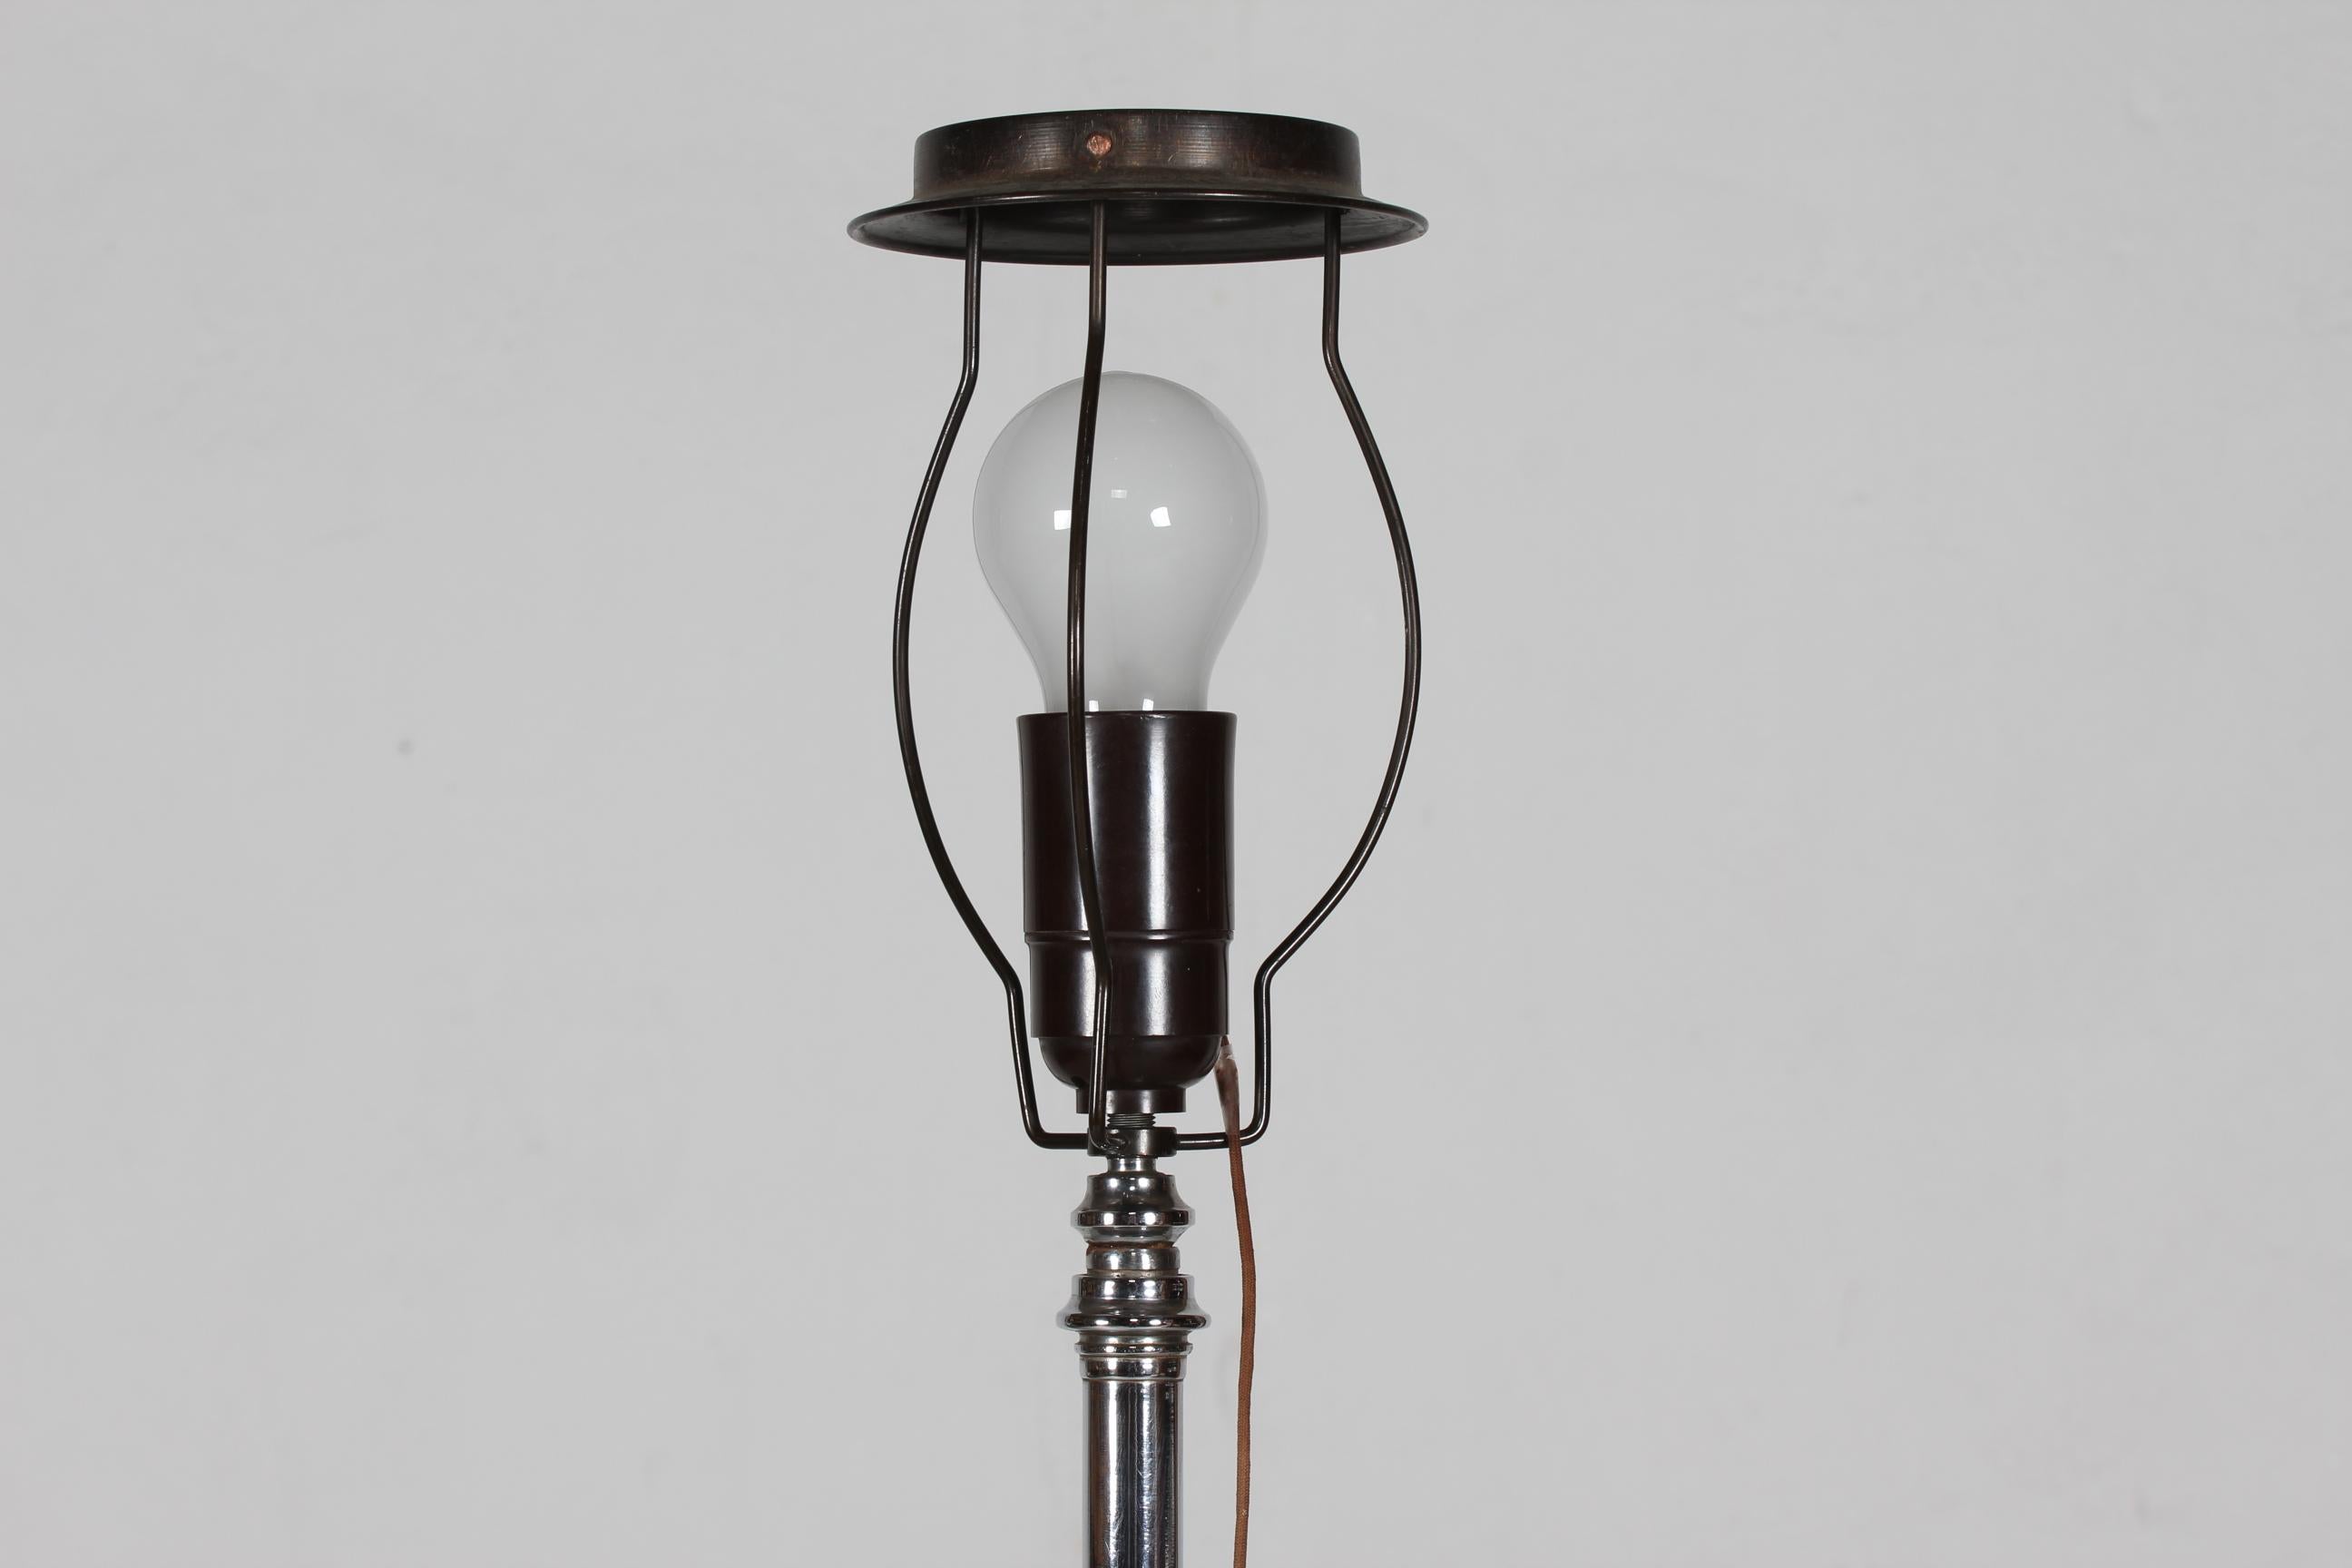 Danish Art Deco Floor Lamp 1930s of Crome Metal and Dark Wood with New Shade For Sale 3